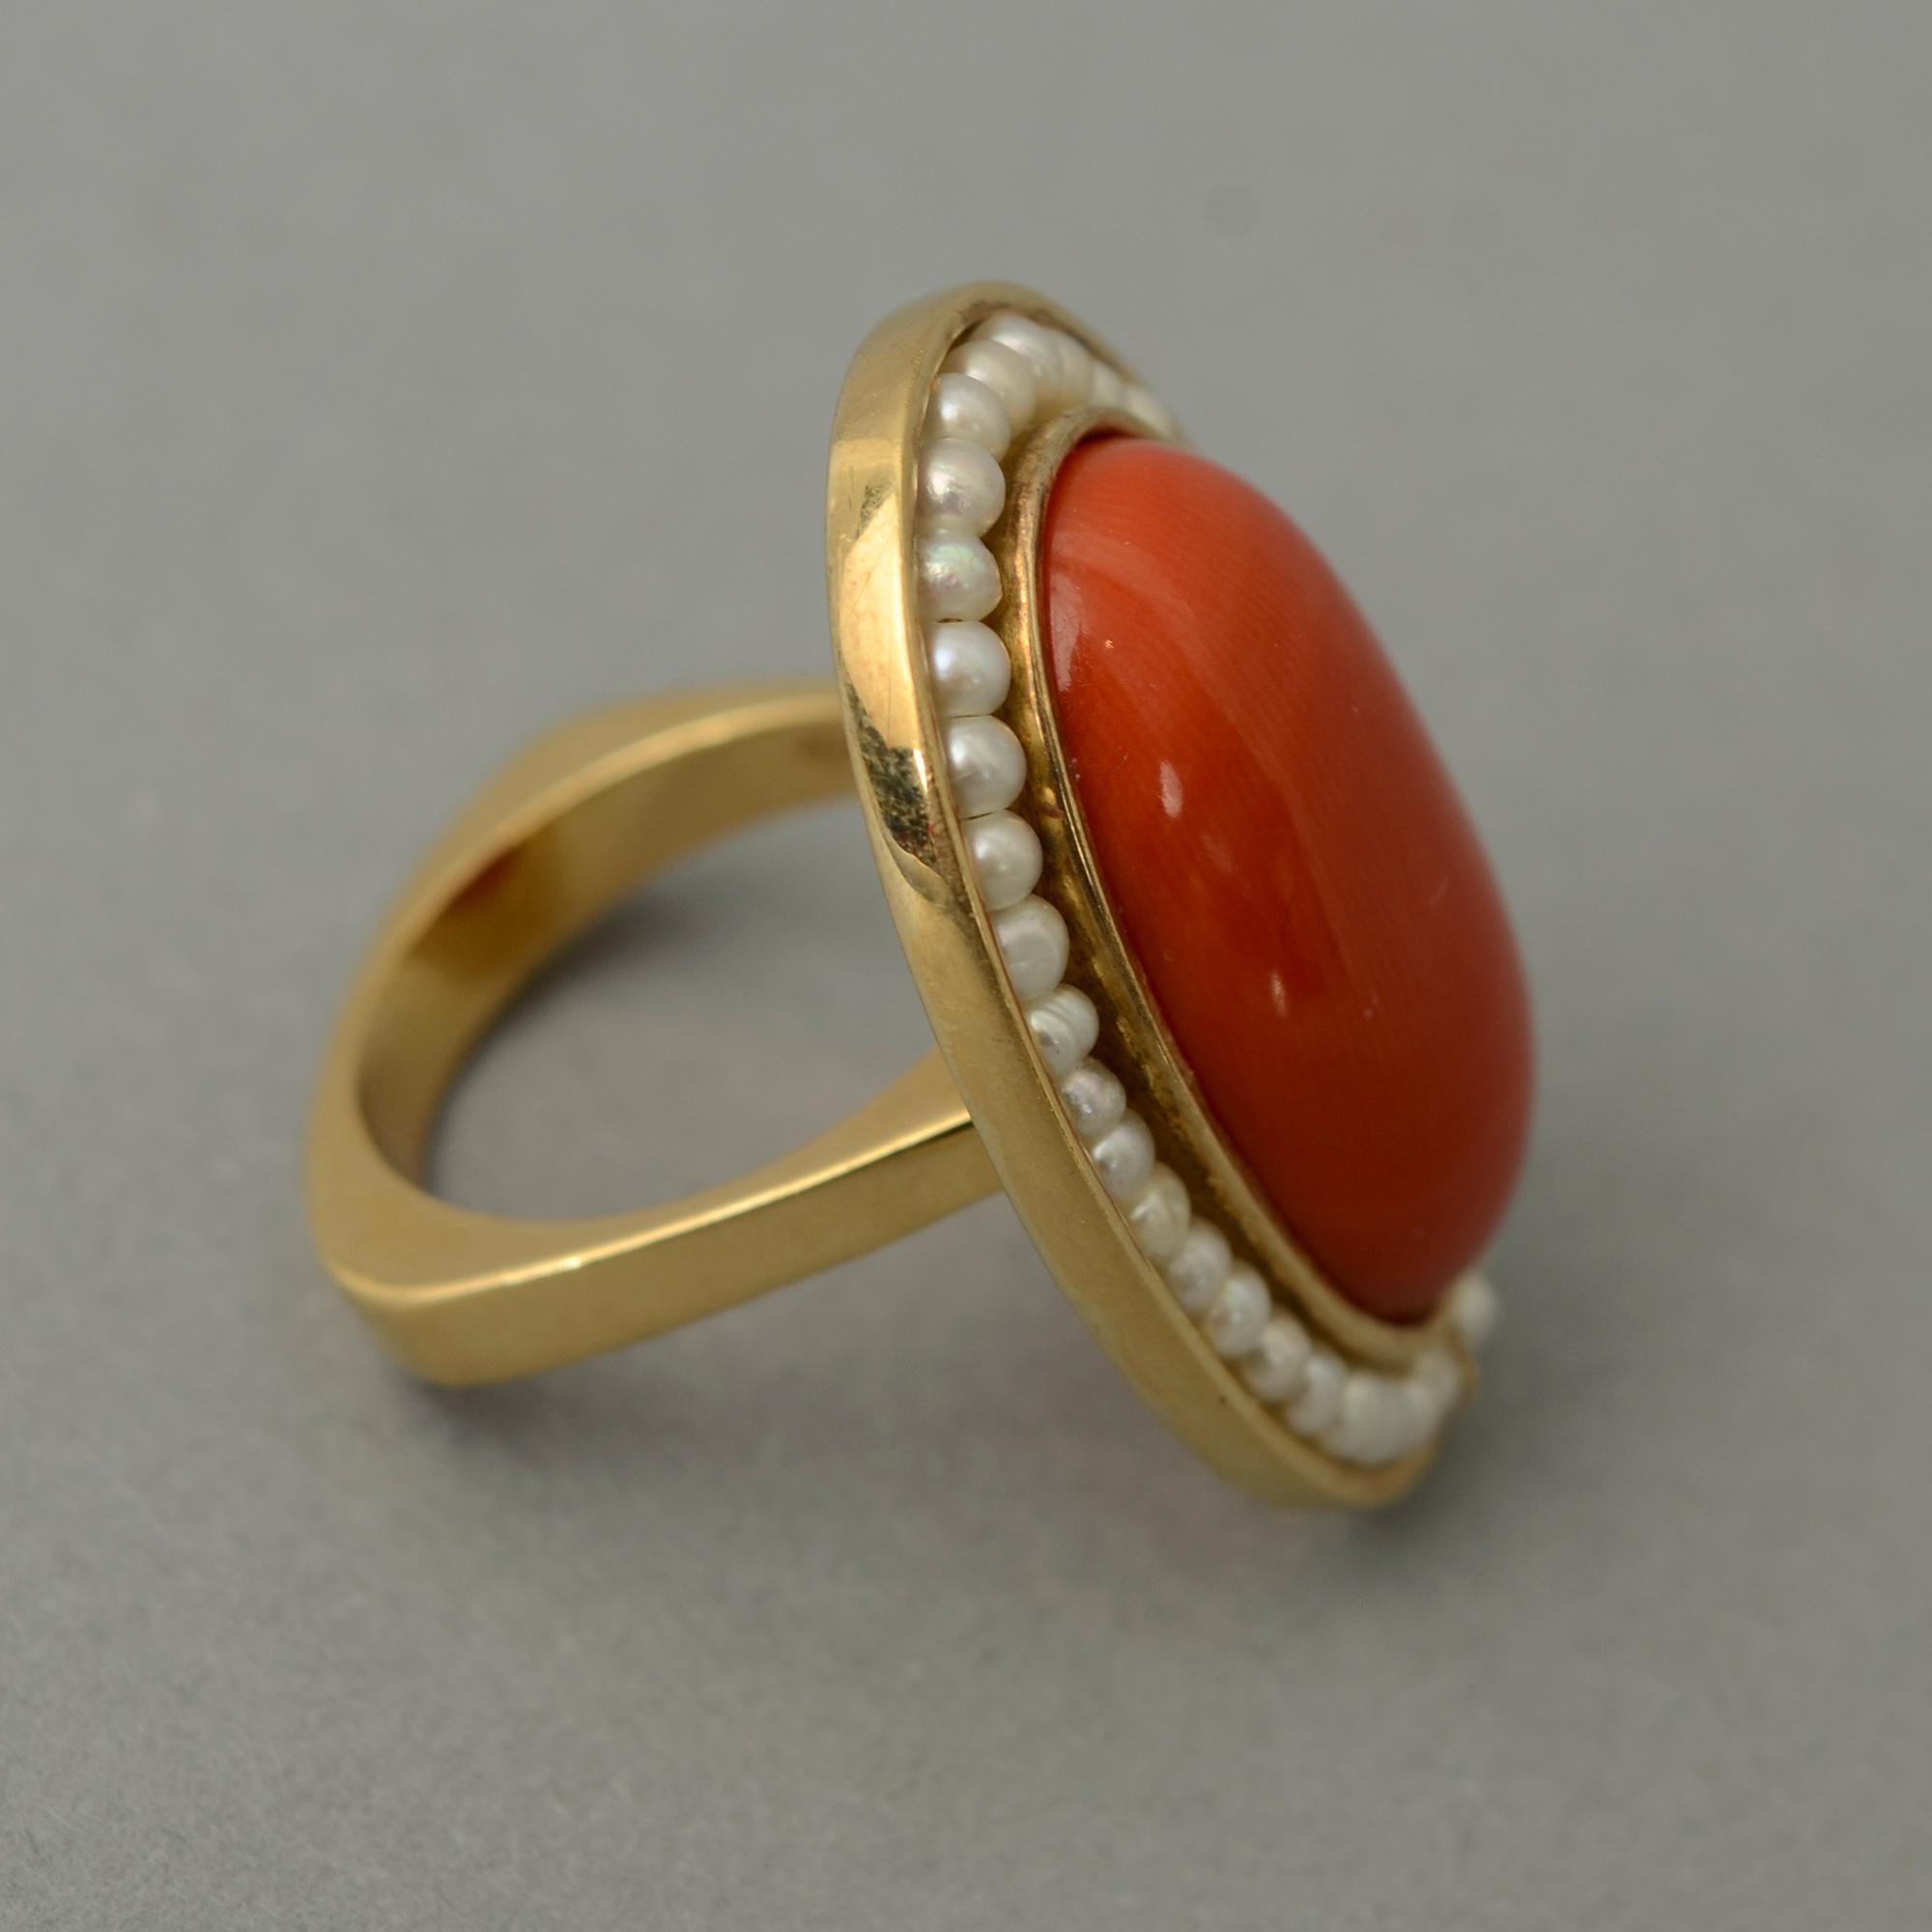 Striking oval ring of coral and natural pearls. The oval coral stone measures 7/8 